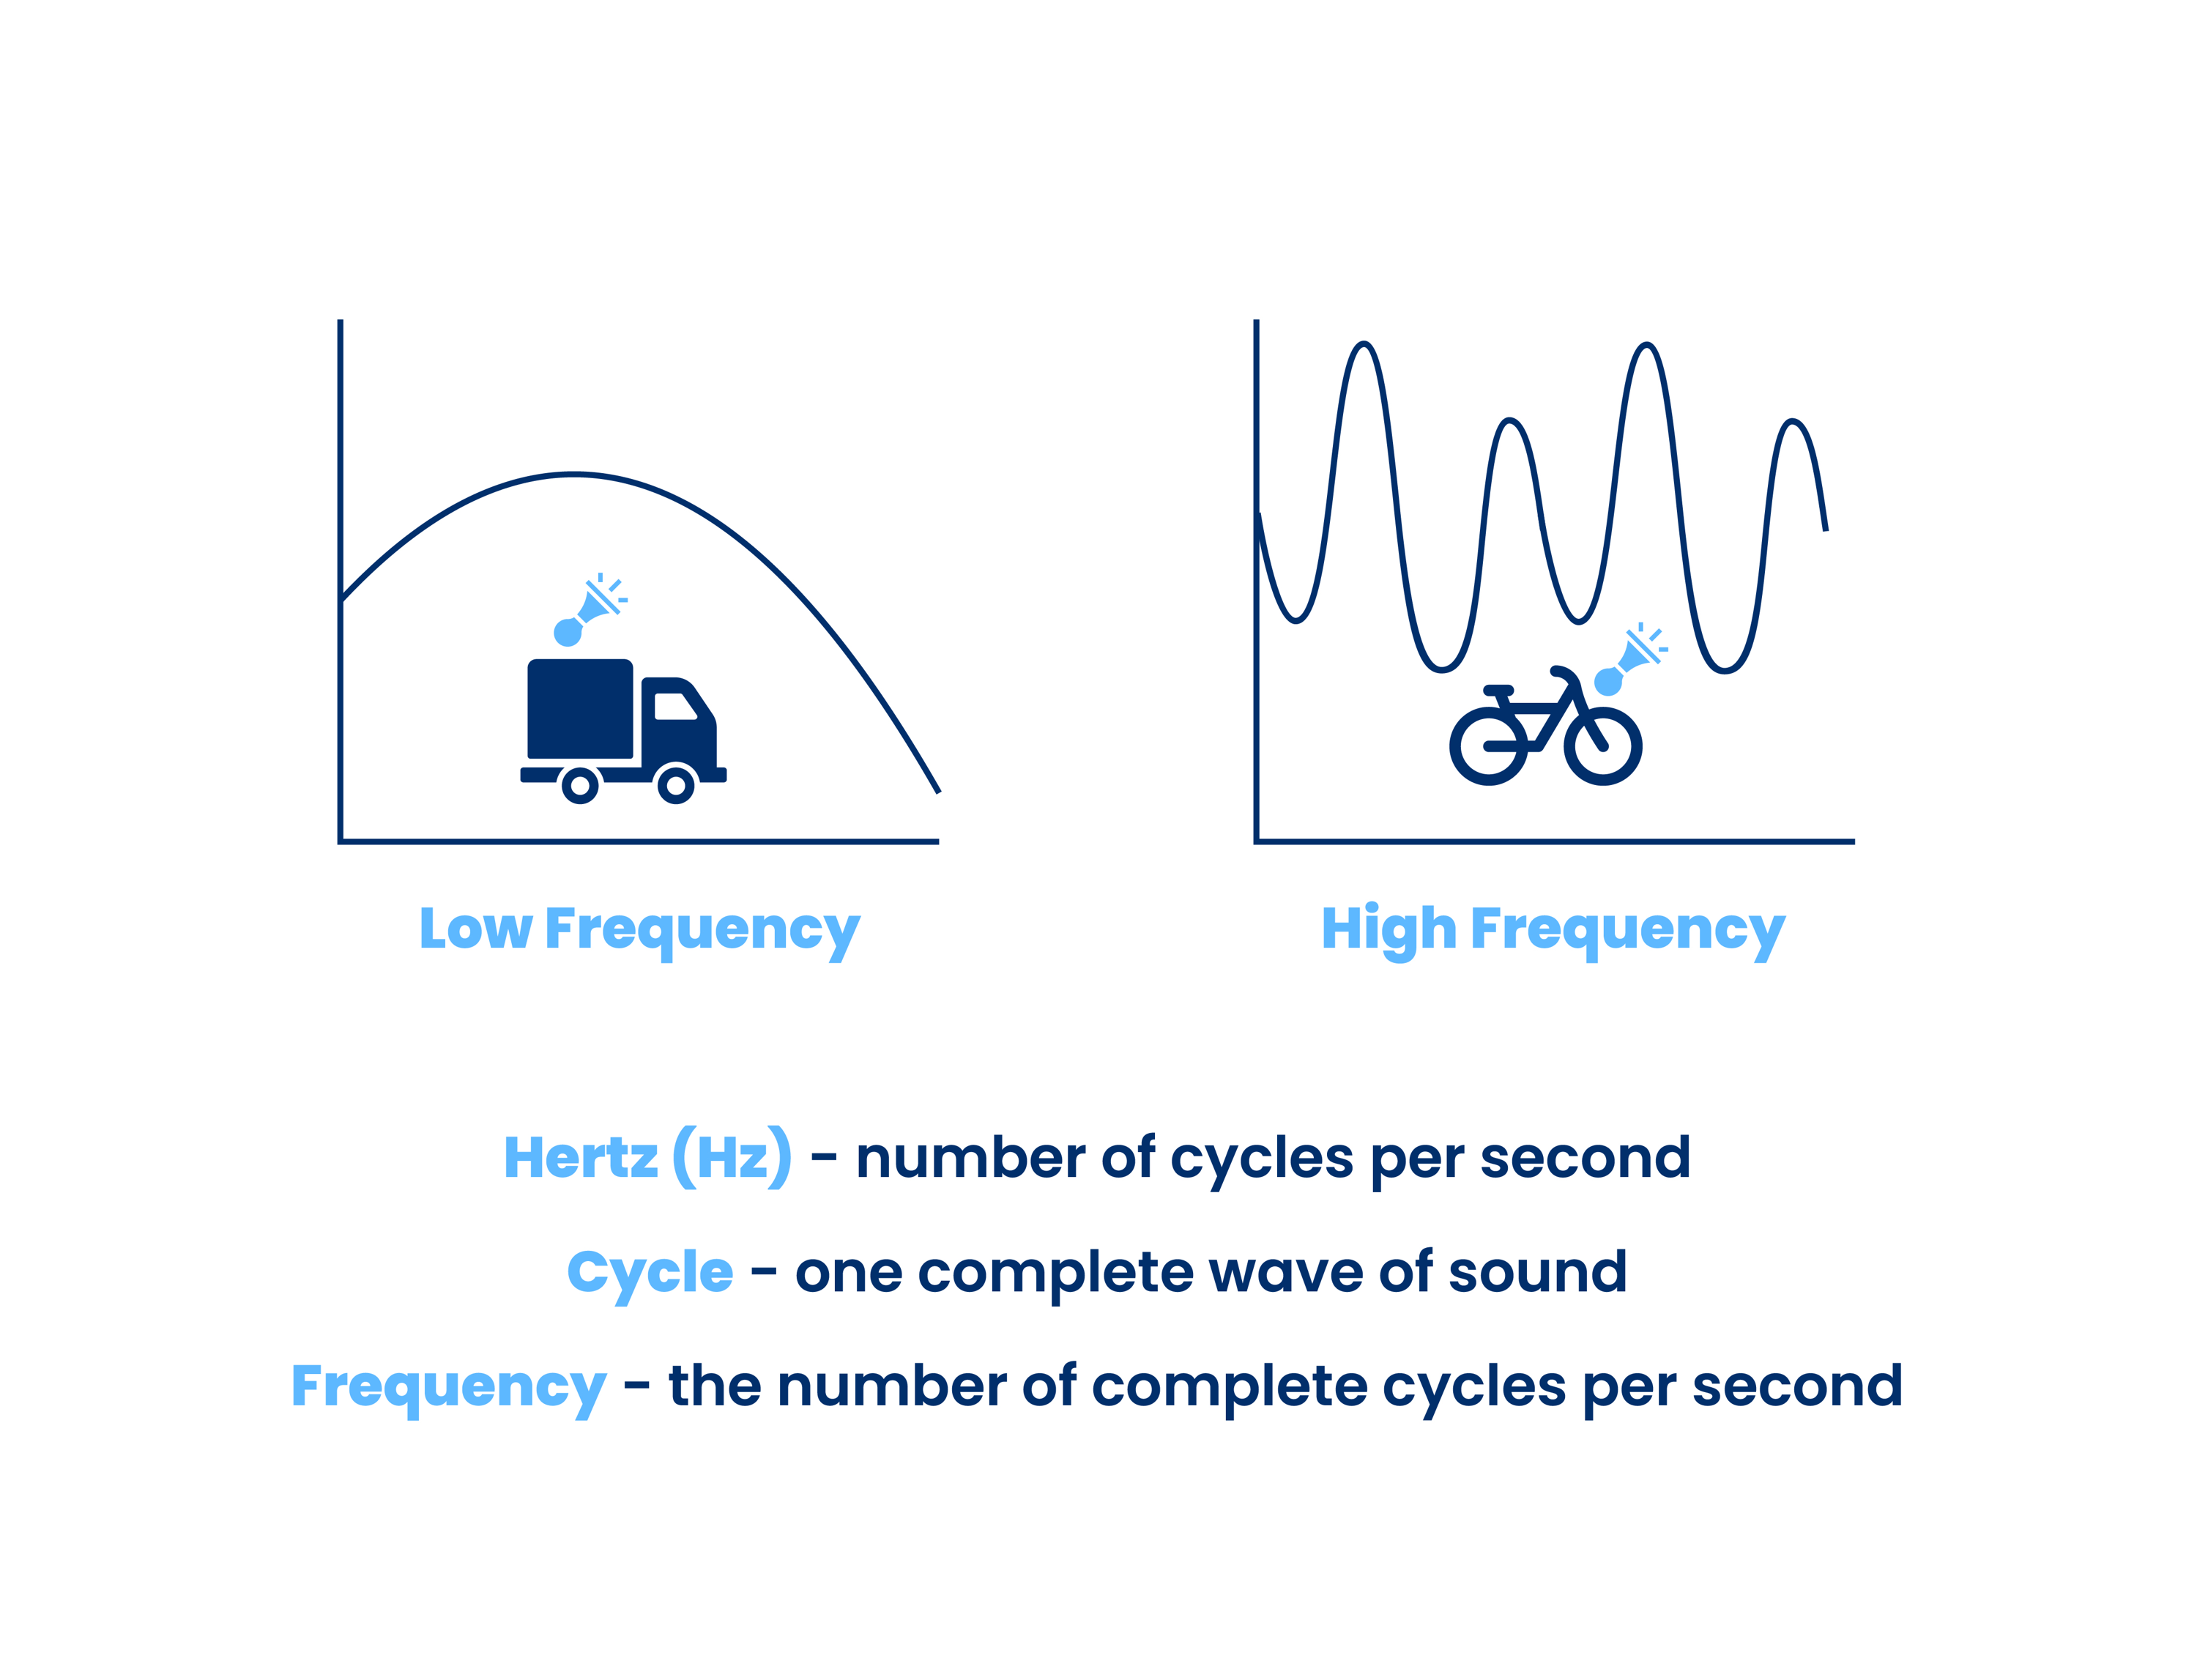 Defining Frequency, Cycle, and Hertz